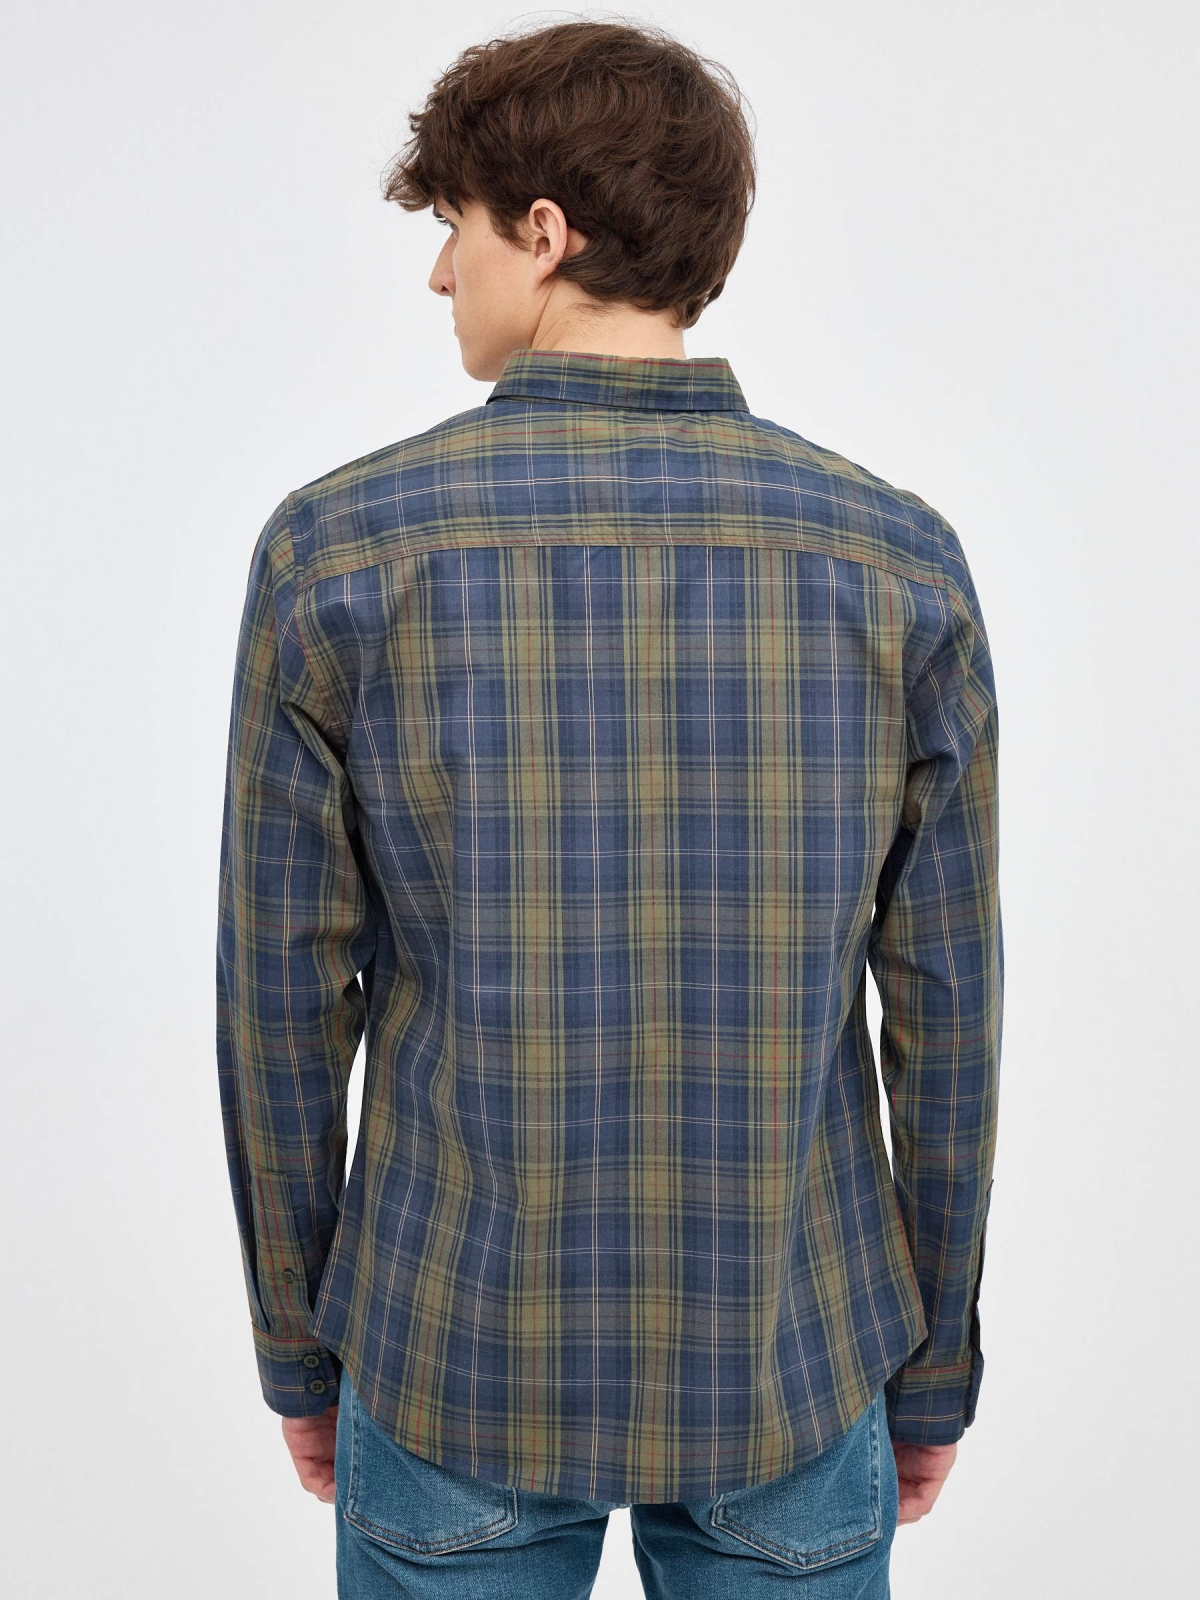 Regular fit blue checkered shirt green middle back view